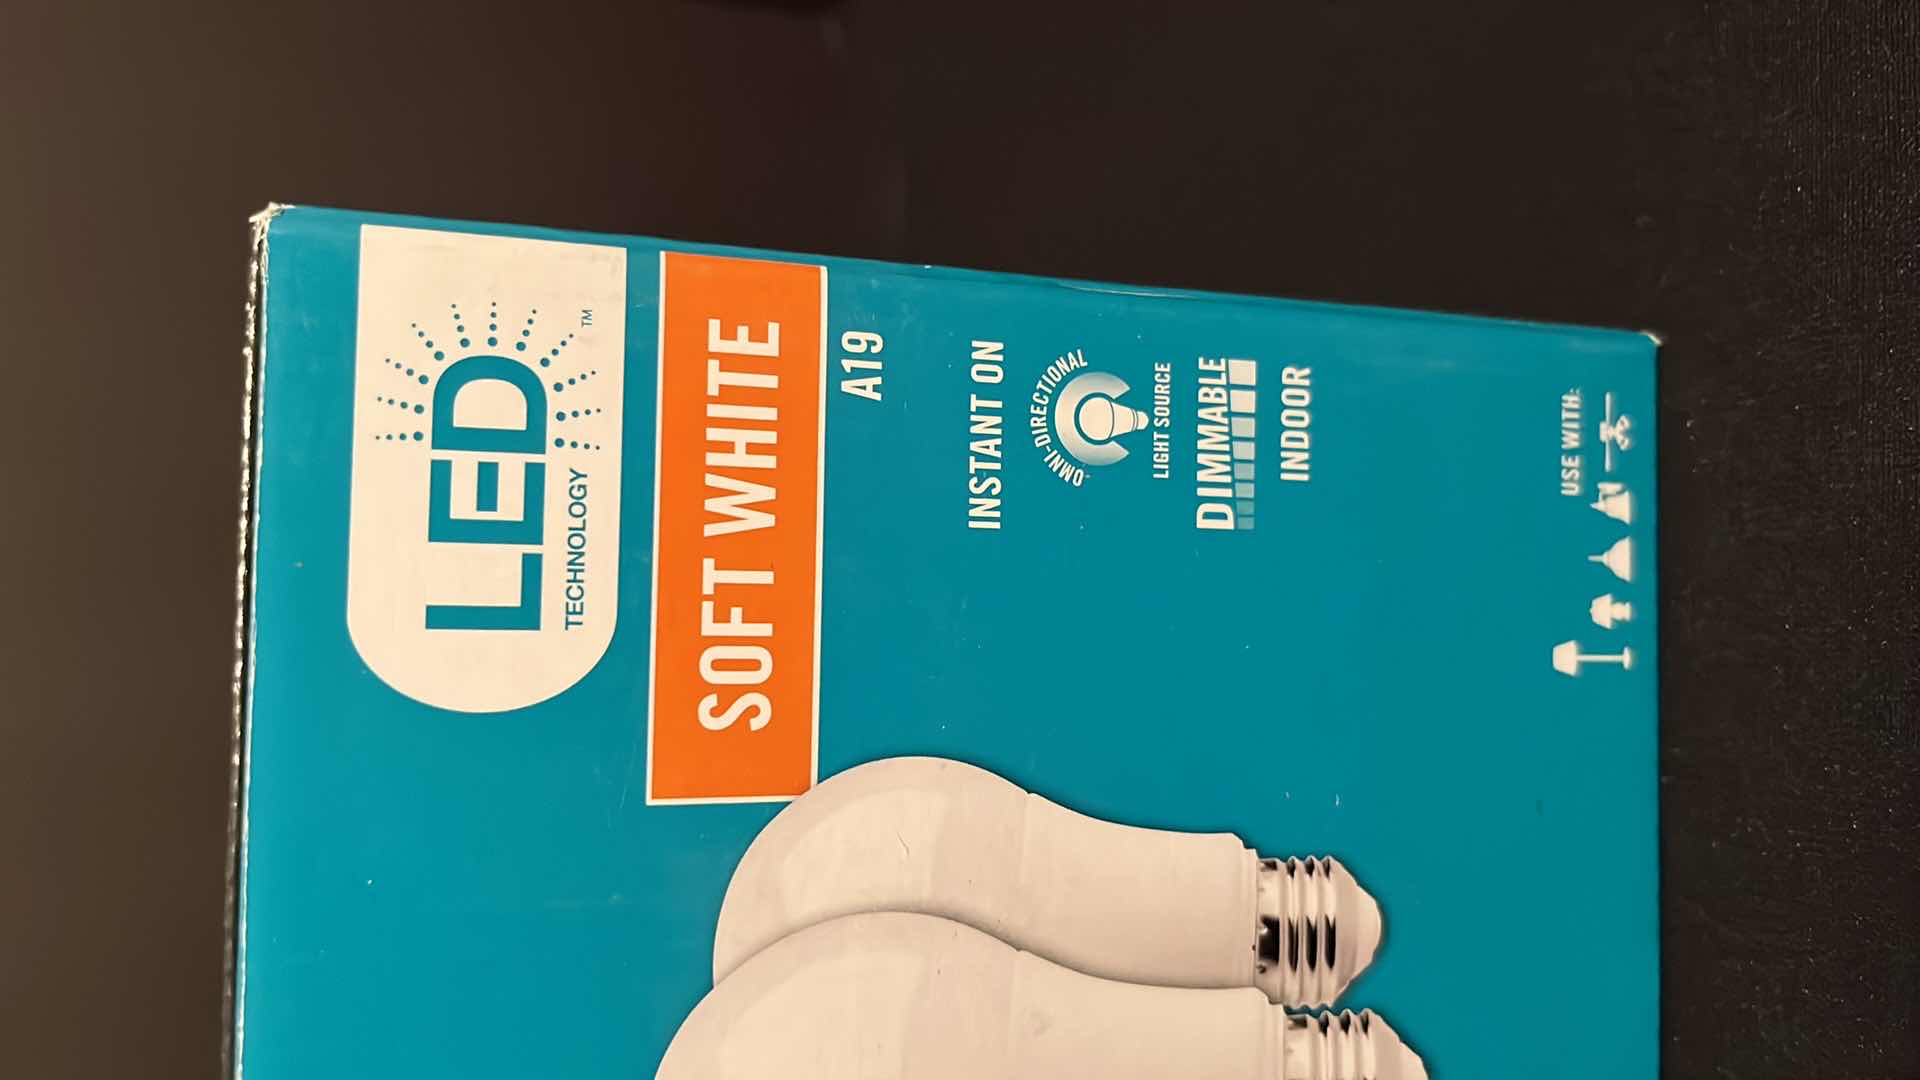 Photo 4 of NIB ECOSMART 4-PACK 60W A19 DIMMABLE ENERGY STAR LED LIGHT BULB SOFT WHITE & INTERMATIC AUTOMATIC LIGHT CONTROL DUSK TO DAWN LIGHT SENSING SOCKET CONVERTER, INDOOR/OUTDOOR 150W AT 120 VAC (MODEL NE1C)